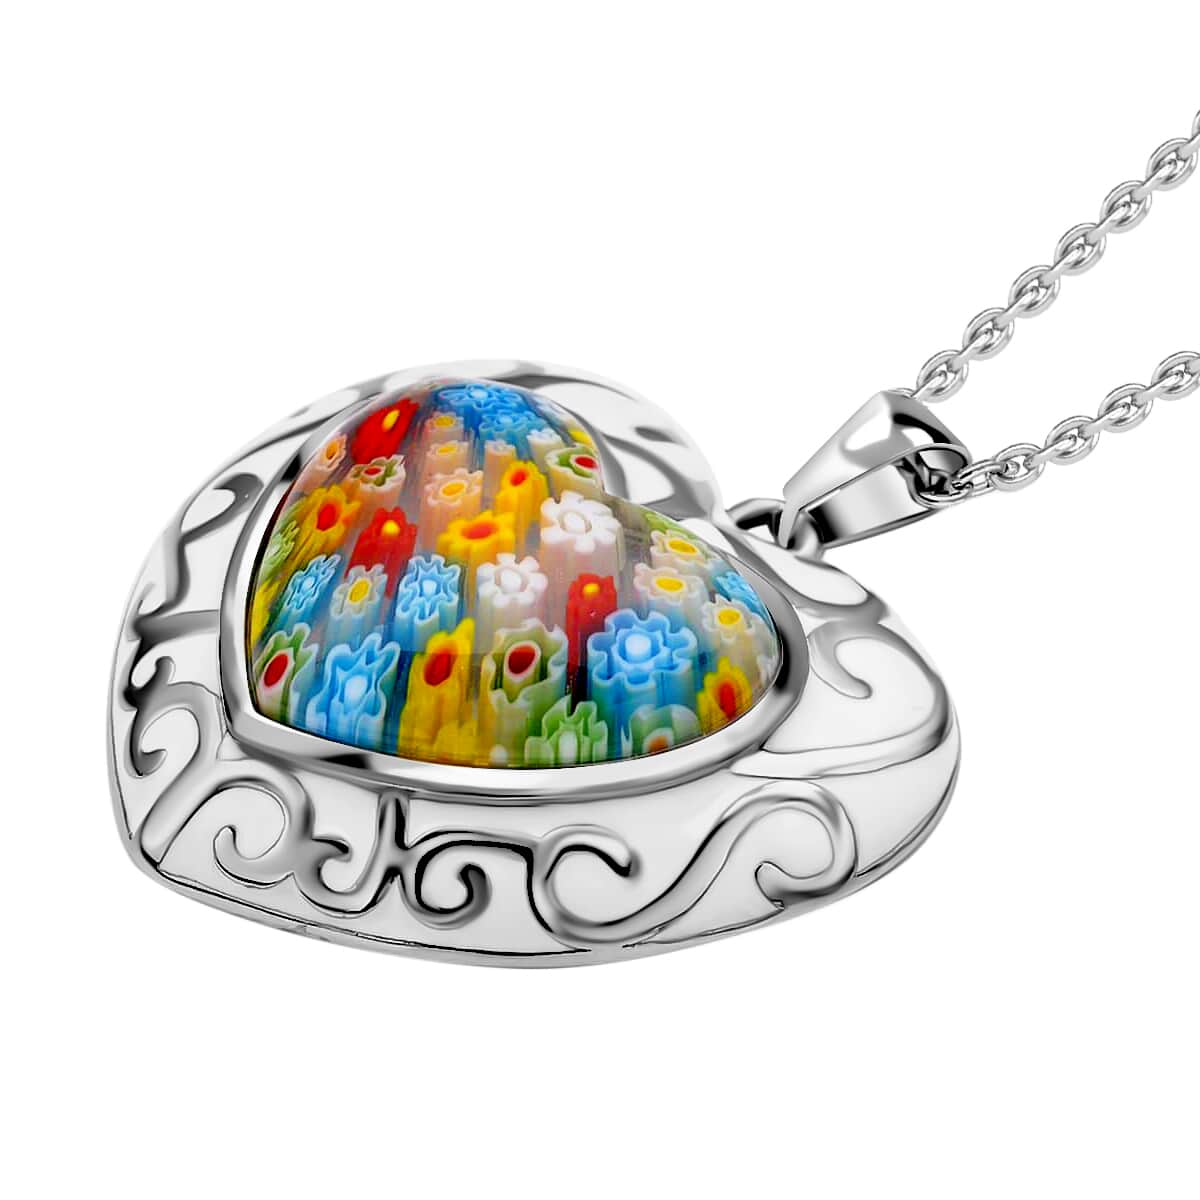 Murano Style and Enameled Heart Pendant Necklace 20 Inches in Stainless Steel, Floral Millefiori Pendant Necklace, Sweatproof Hypoallergenic Necklace, Gift For Her image number 3